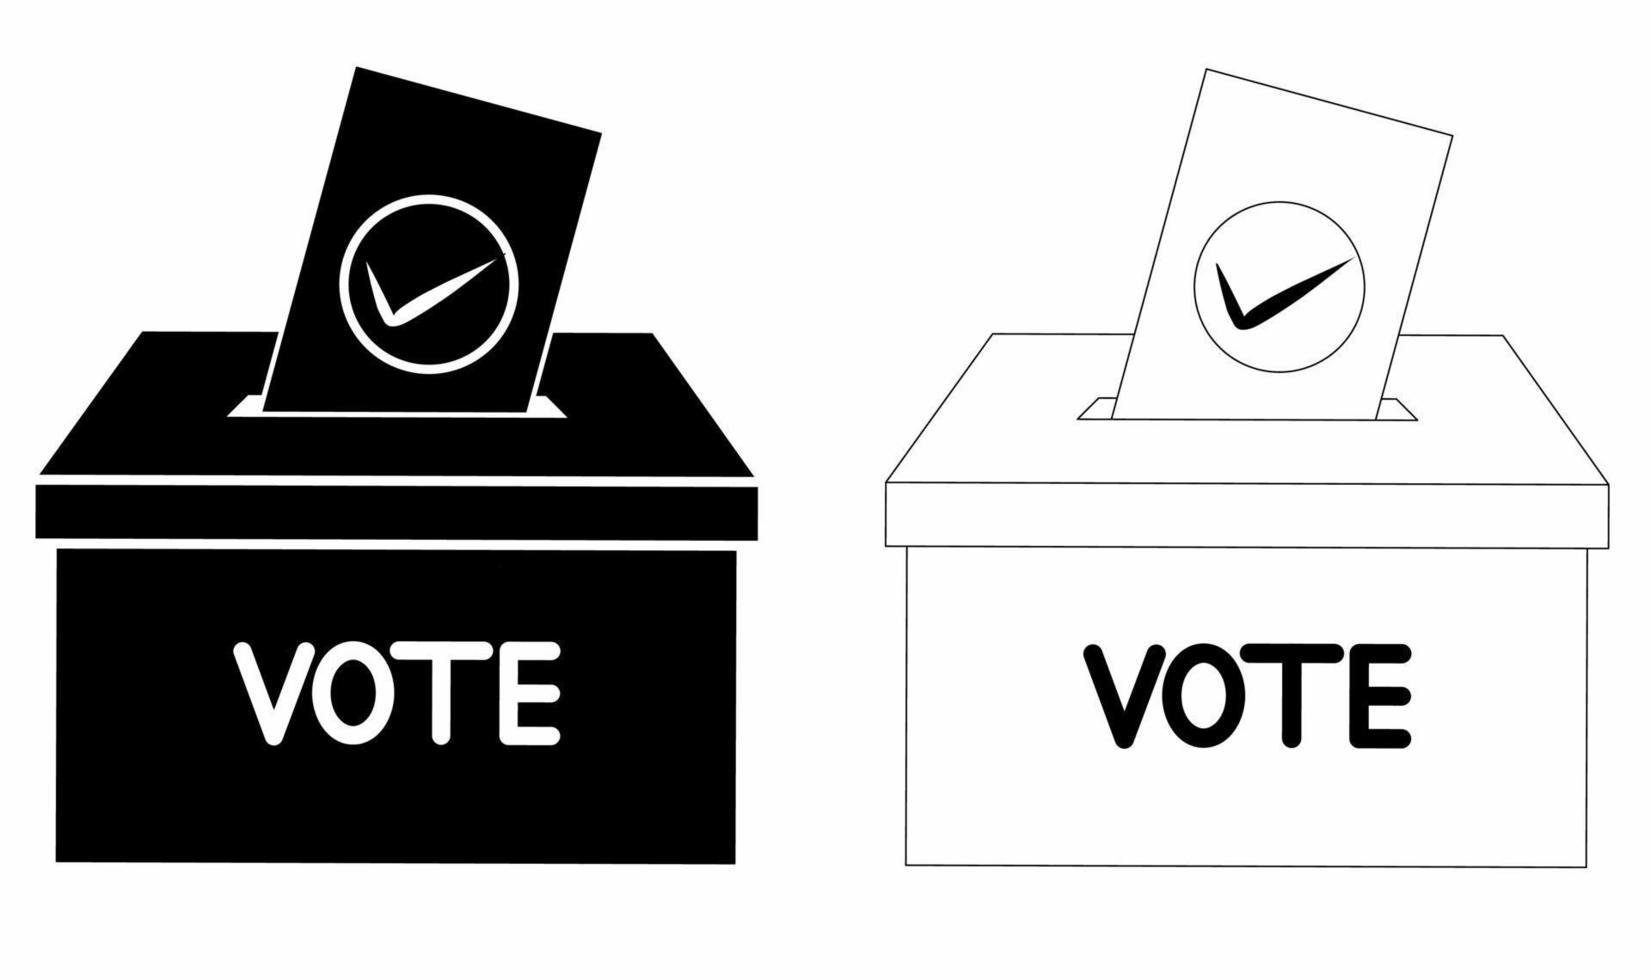 outline silhouette Voting ballot box icon set isolated on white background vector